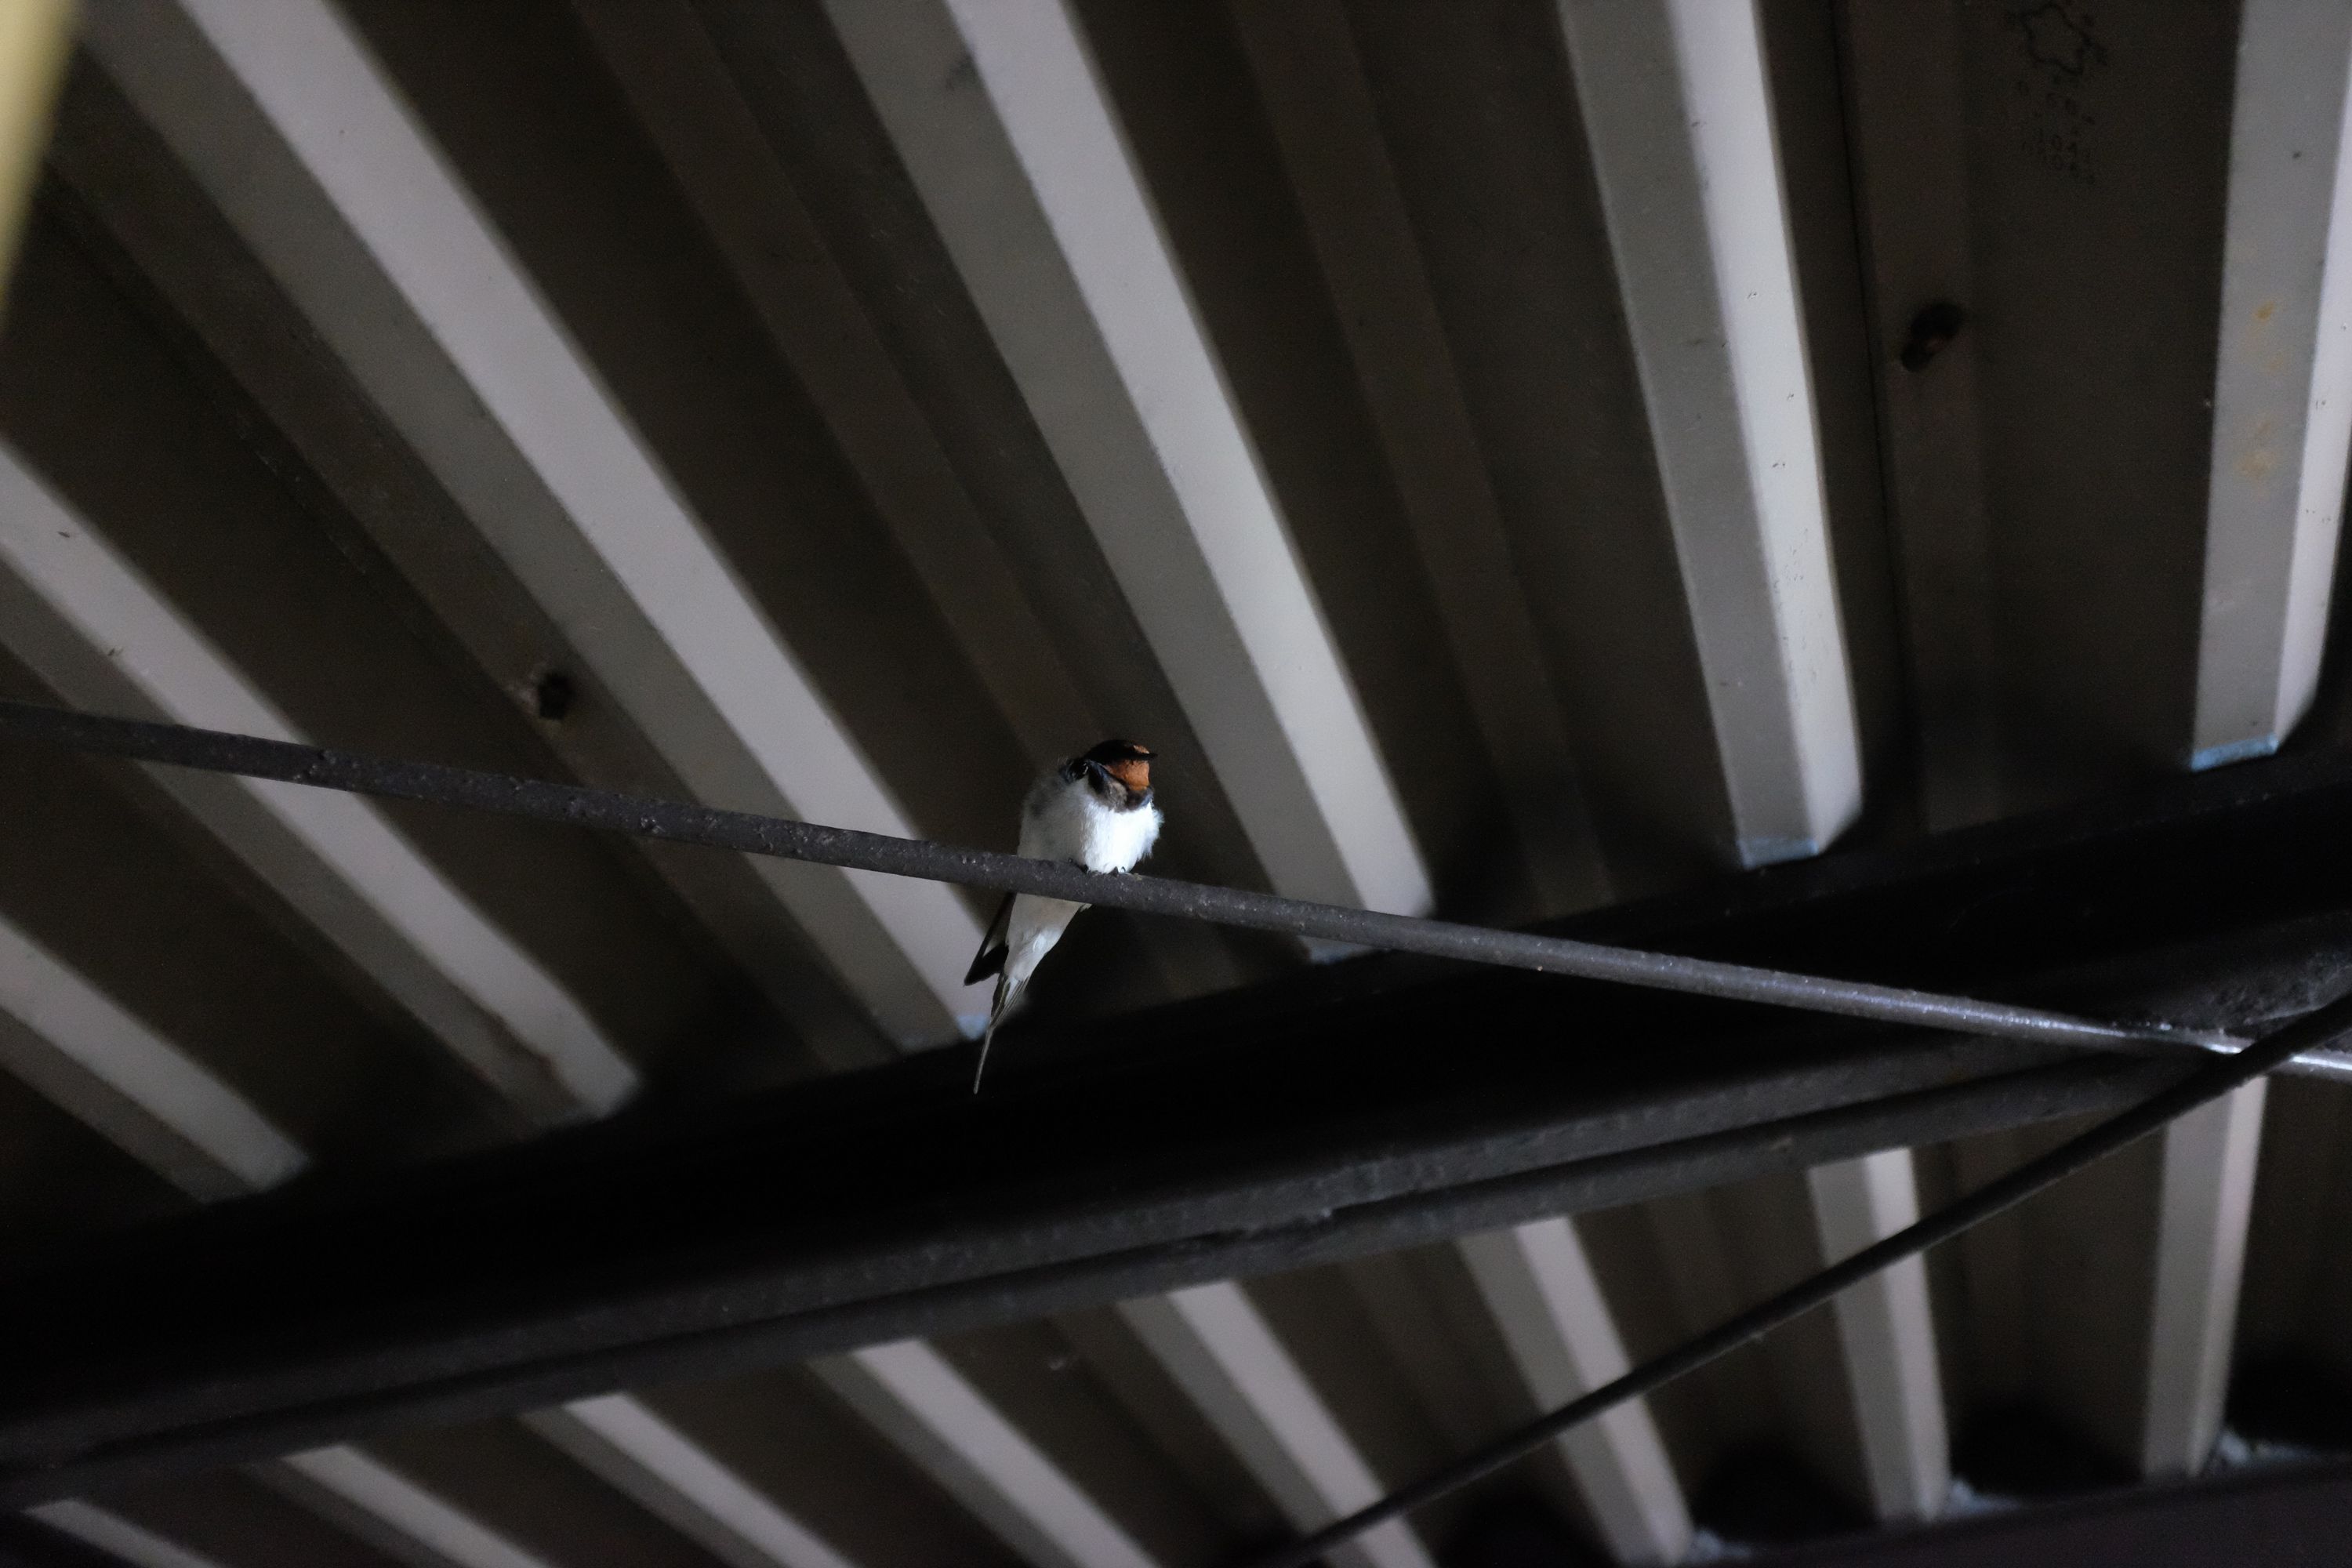 A barn swallow perched on an iron rod under a corrugated metal ceiling, the light looks artificial and implies that it’s at night.